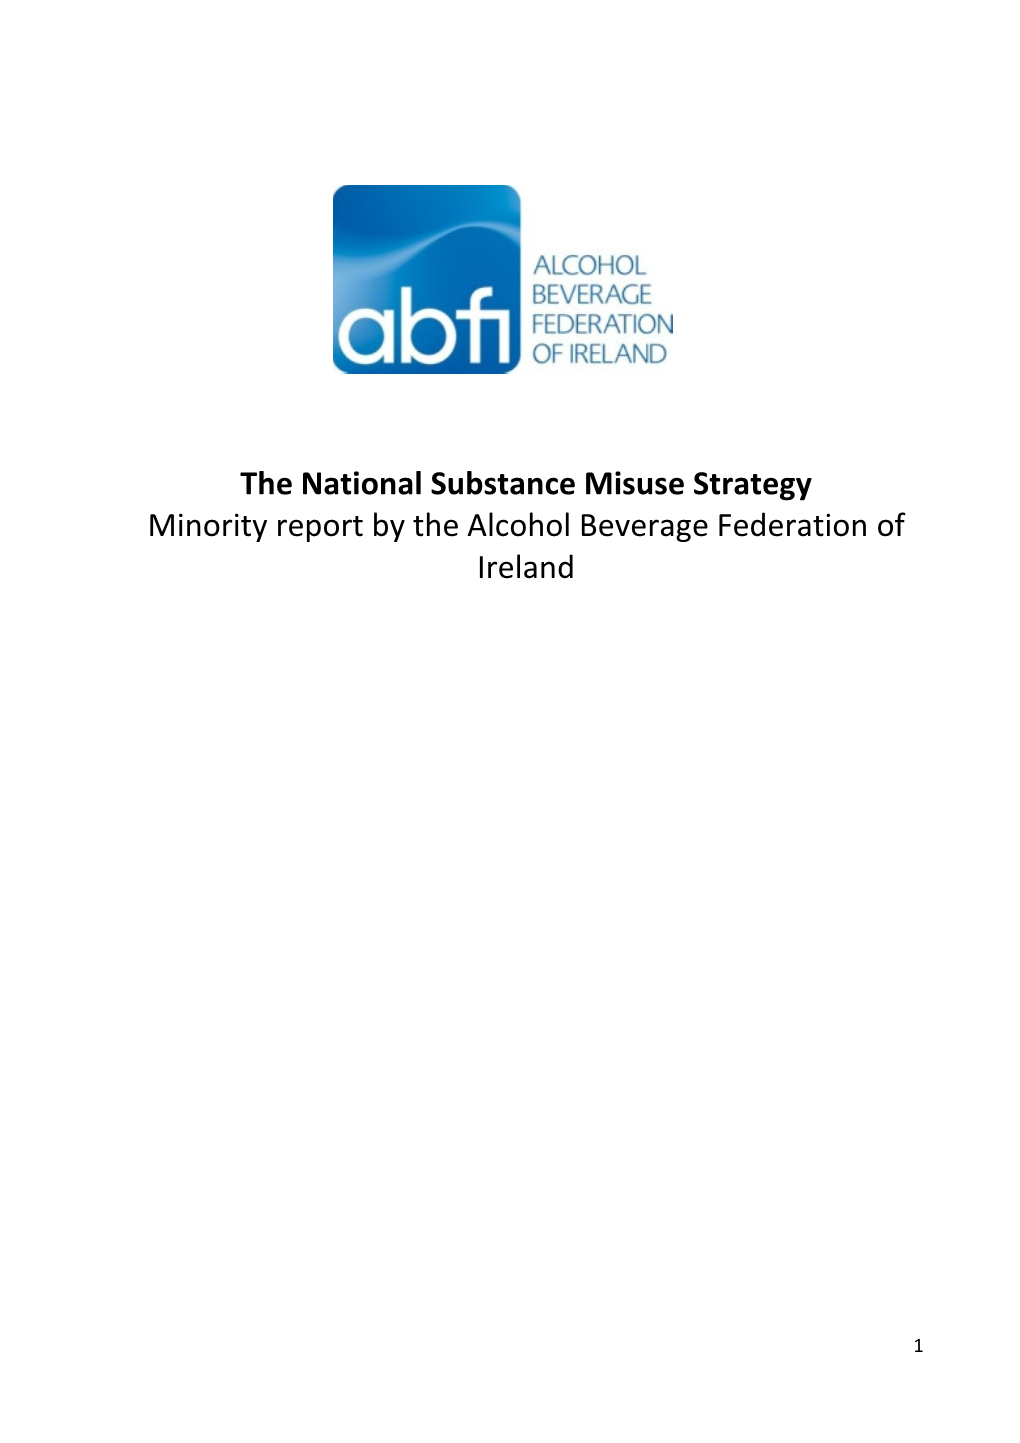 The National Substance Misuse Strategy Minority Report by the Alcohol Beverage Federation of Ireland